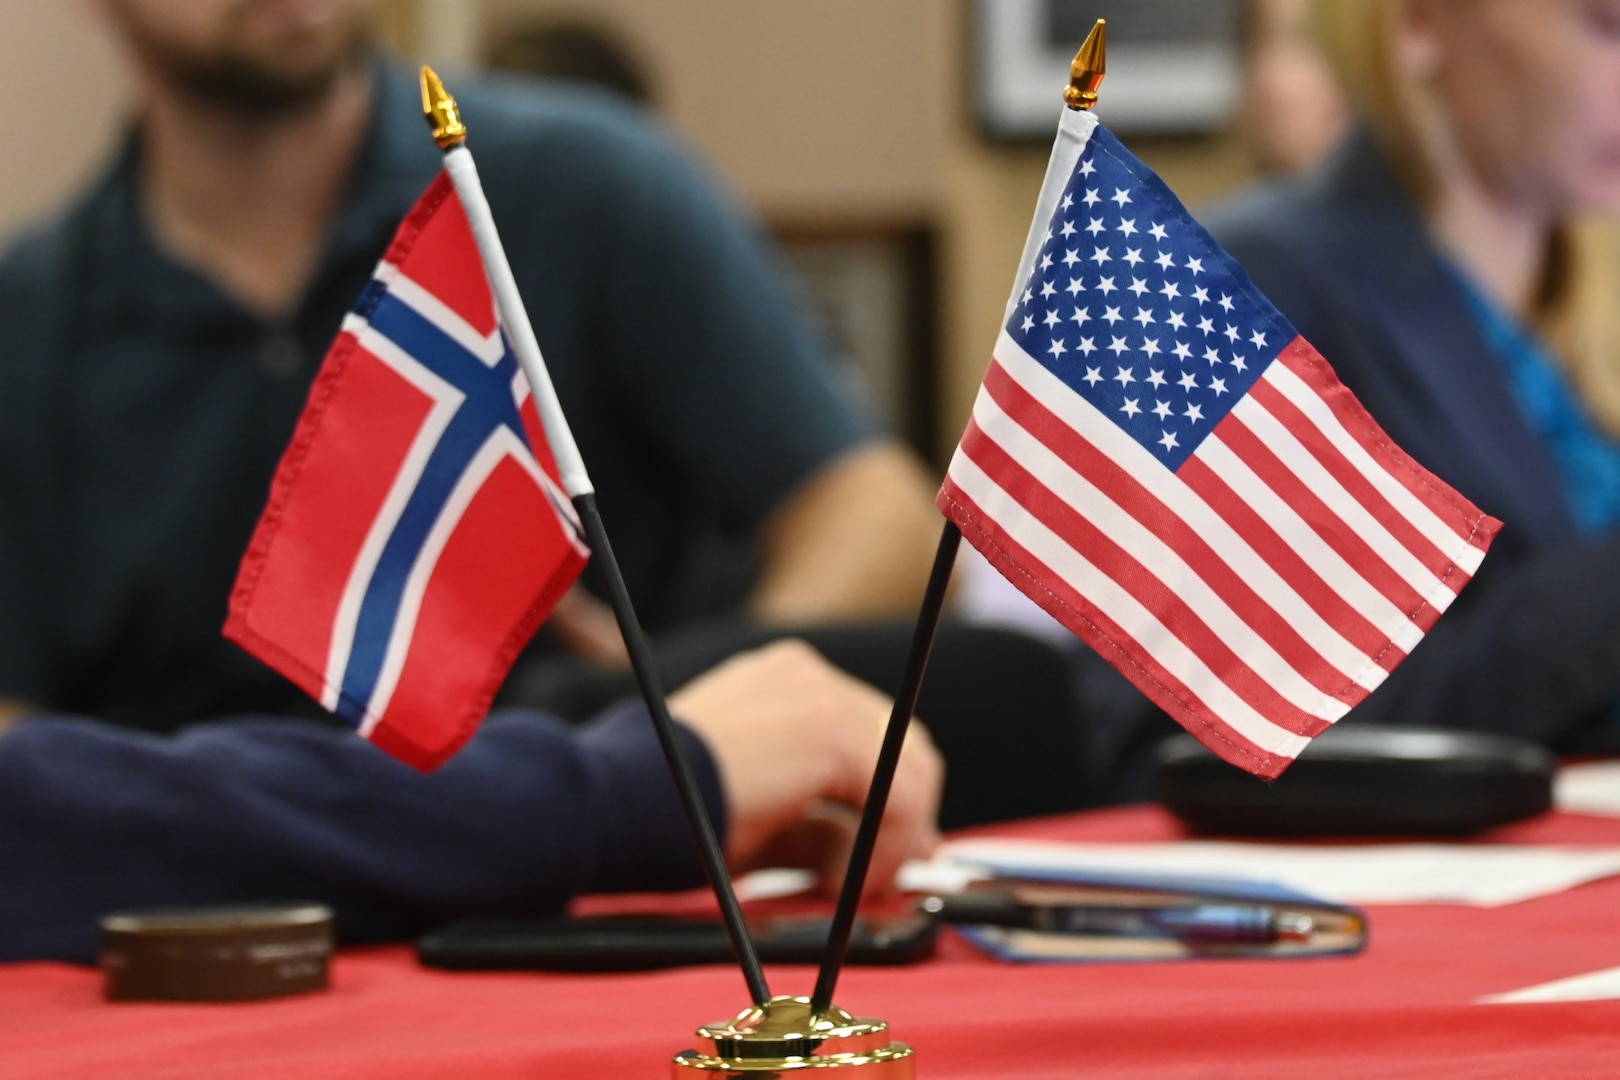 The Norwegian and U.S. flags are displayed during a science roundtable aboard the U.S. Coast Guard Cutter Healy (WAGB 20), while moored in Tromsø, Norway, Oct. 3, 2023. The science roundtable brought together researchers and operators from the U.S., Norway, and Canada to discuss best practices in search and rescue, environmental protection, and vessel safety and navigation in the Arctic. (U.S. Coast Guard photo by Senior Chief Charly Tautfest)